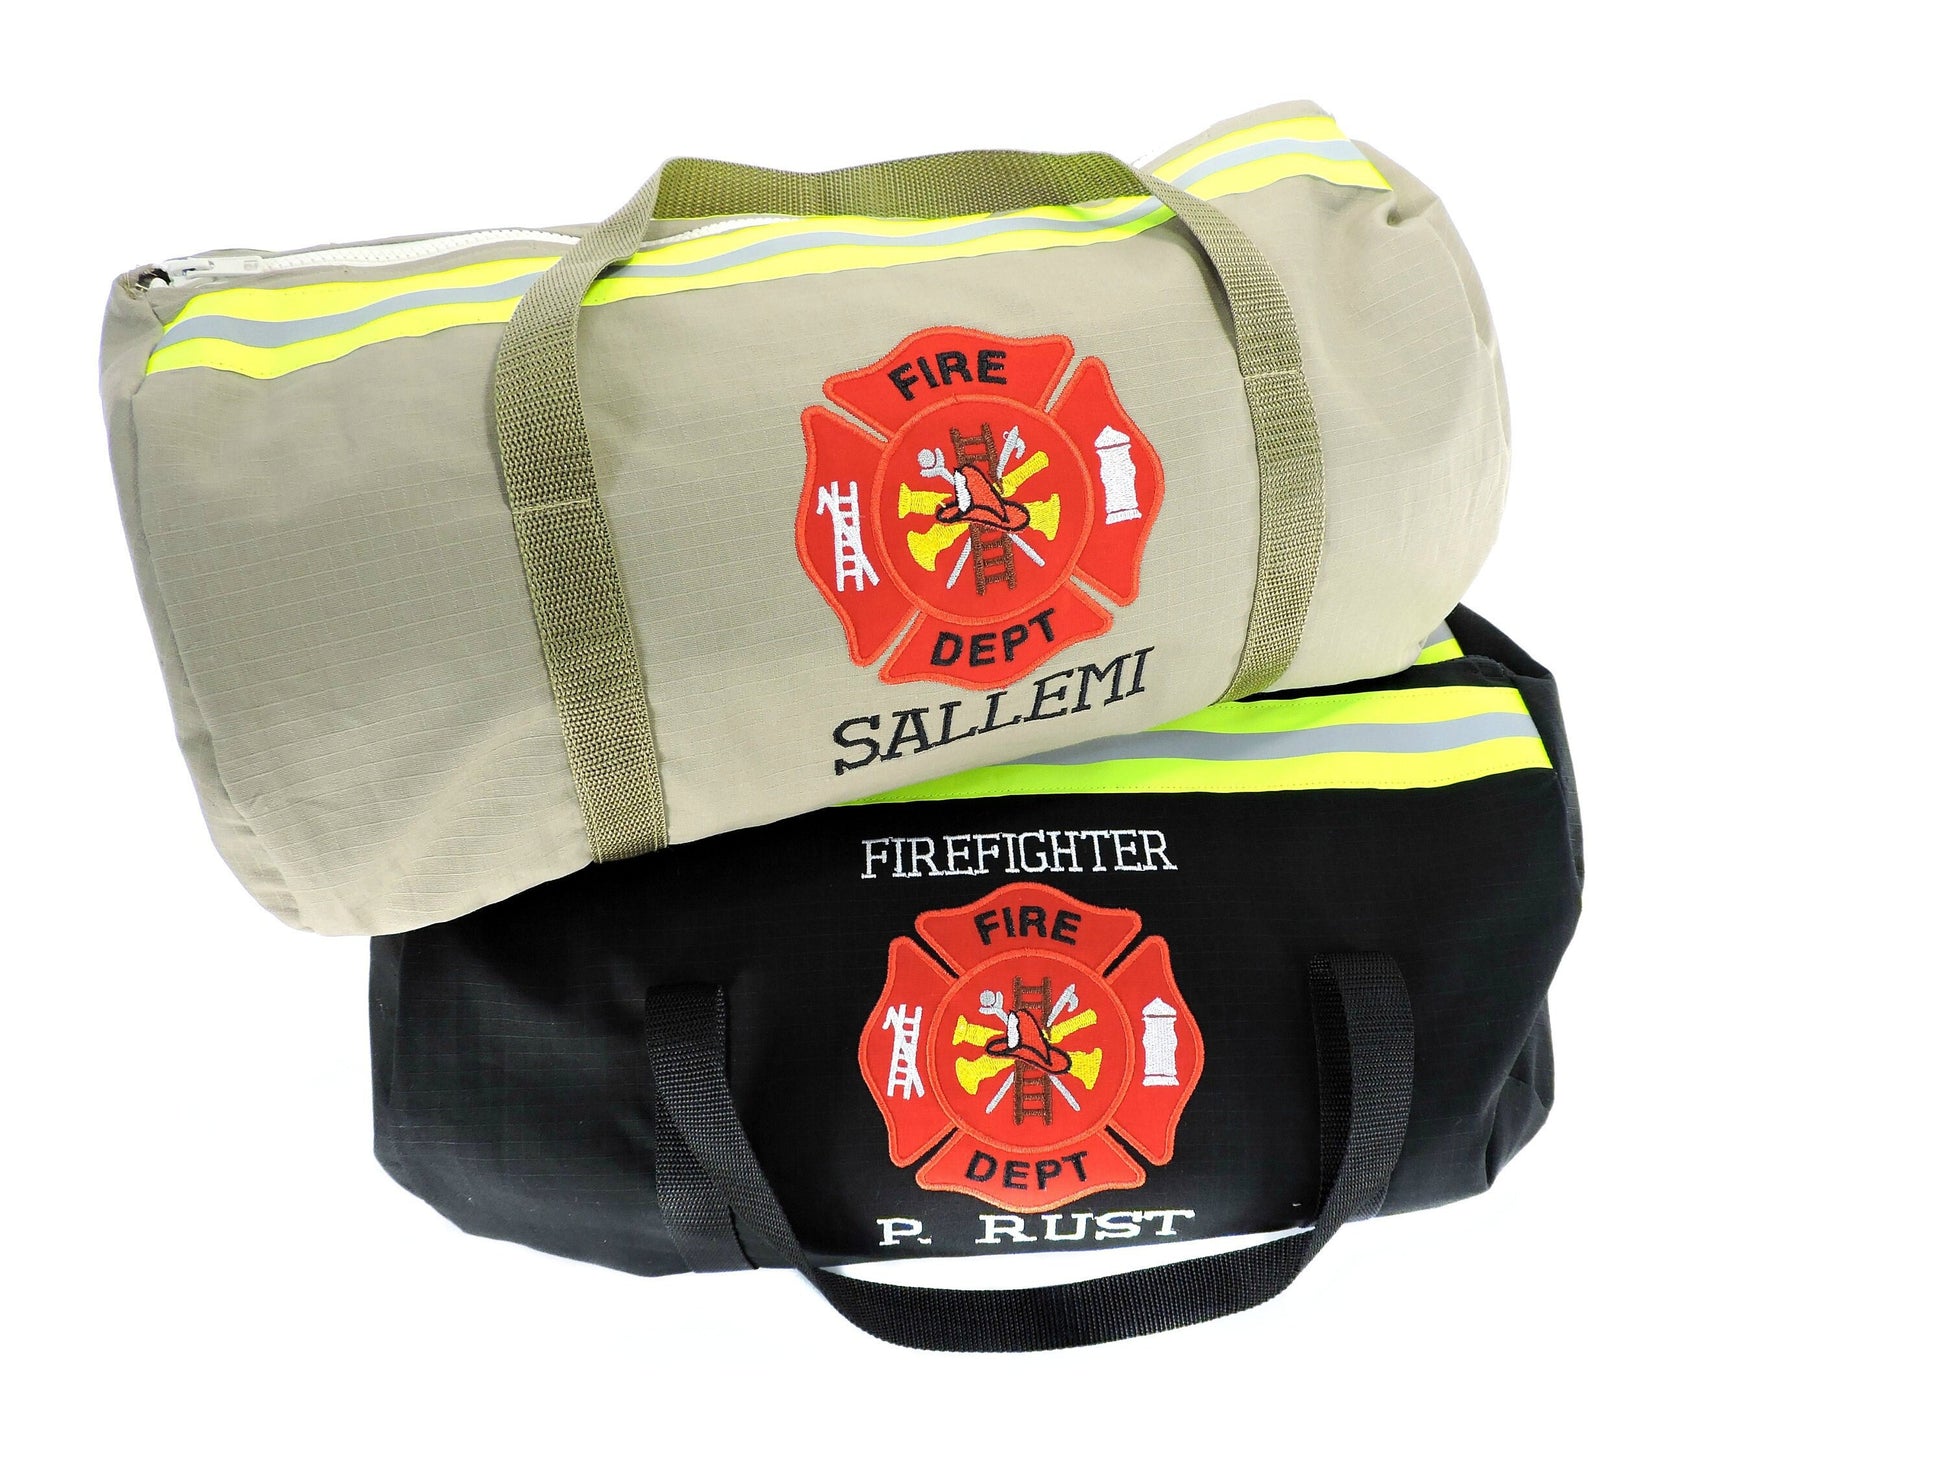 firefighter duffel bag with neon yellow tape